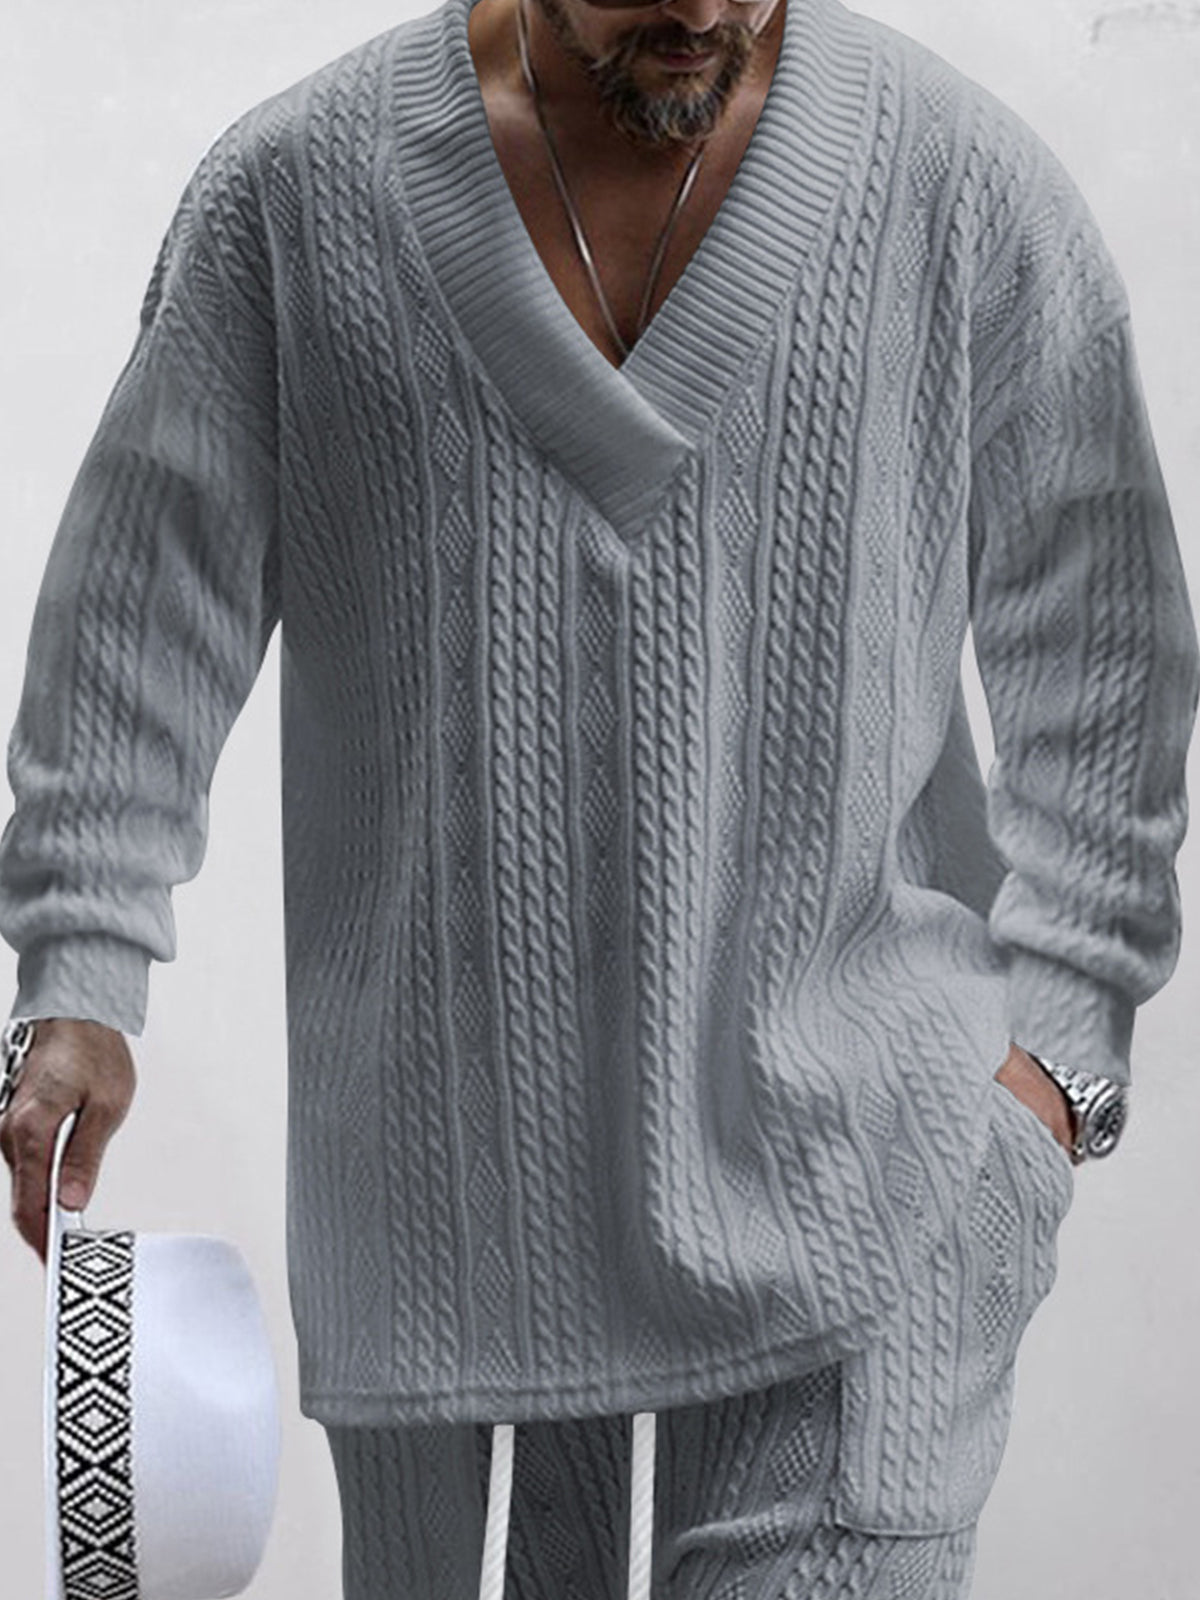 Casual Jacquard Loose Knitted Solid Color V-Neck Long Sleeve Men's Top